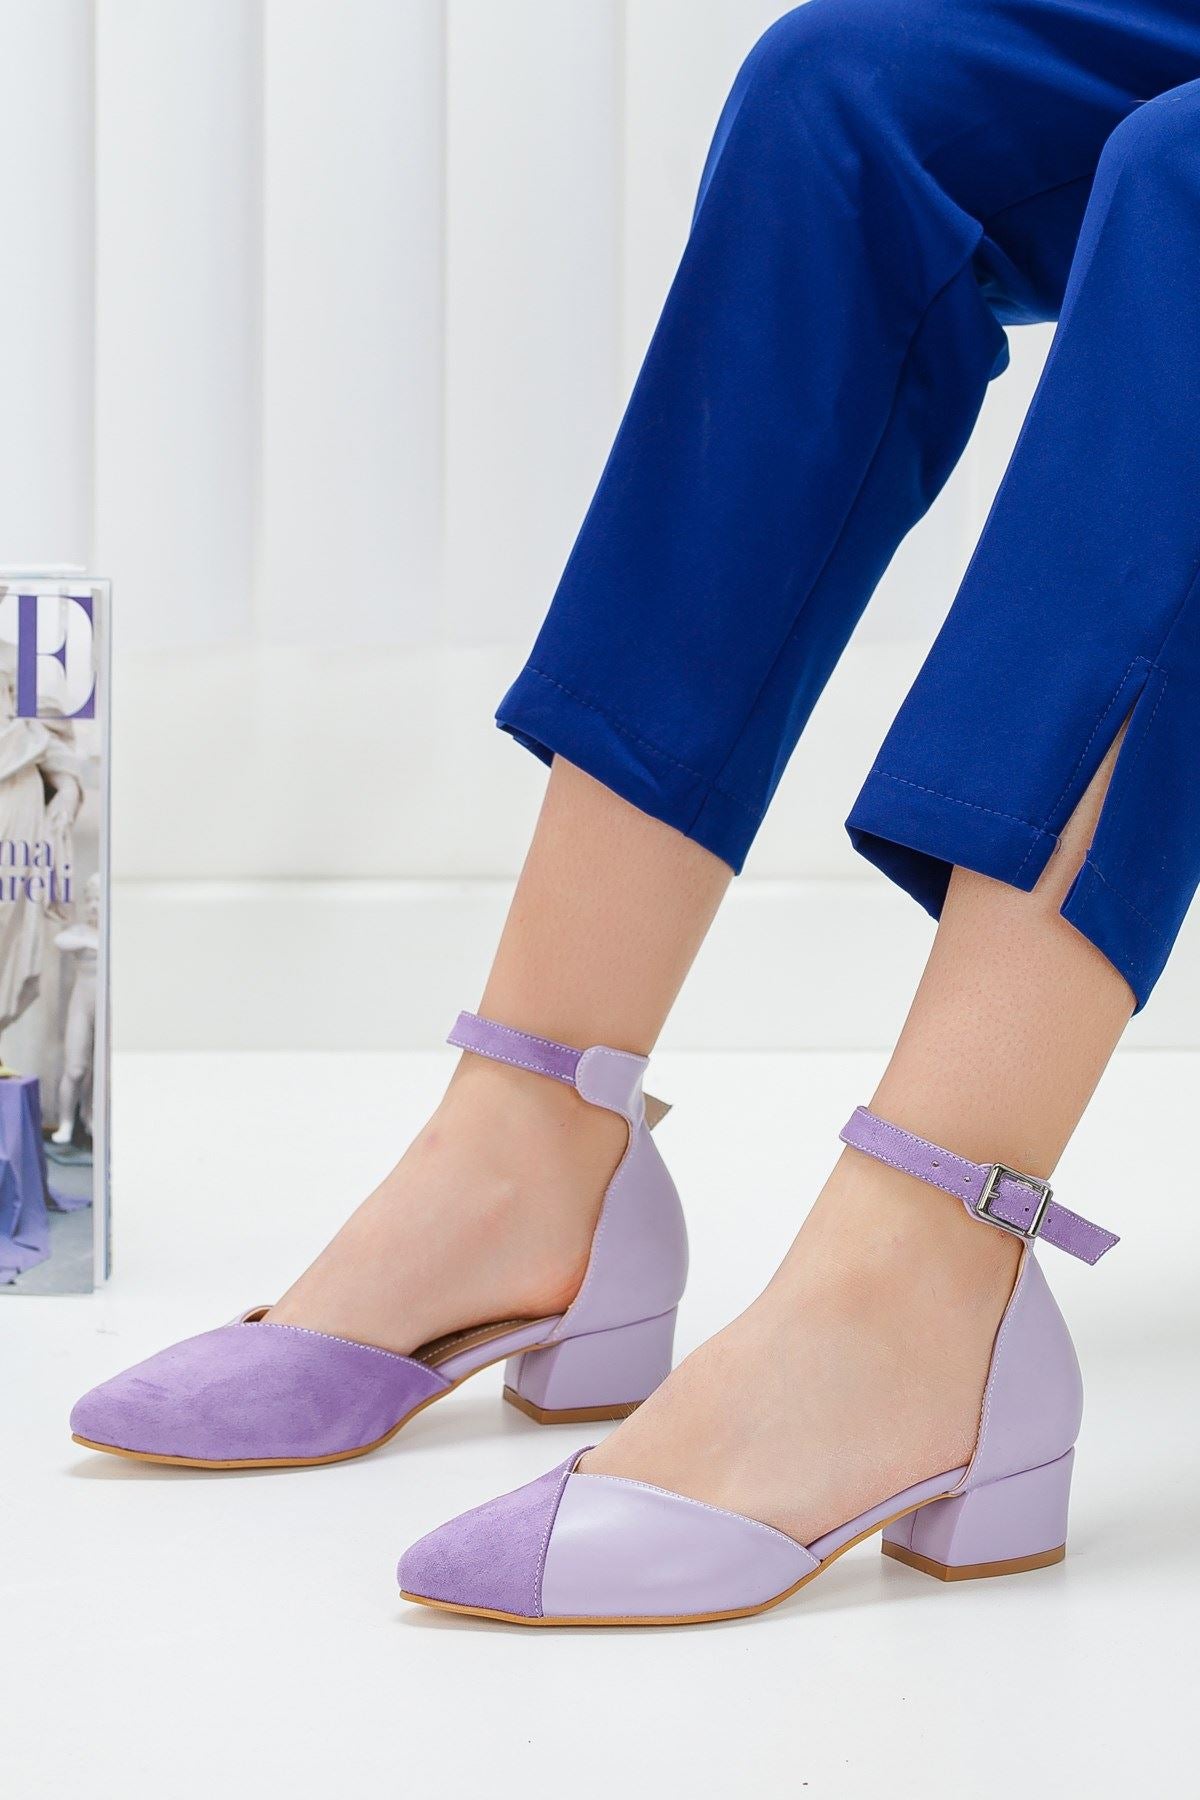 Women's Holly Lilac Skin-Suede Heeled Shoes - STREETMODE™